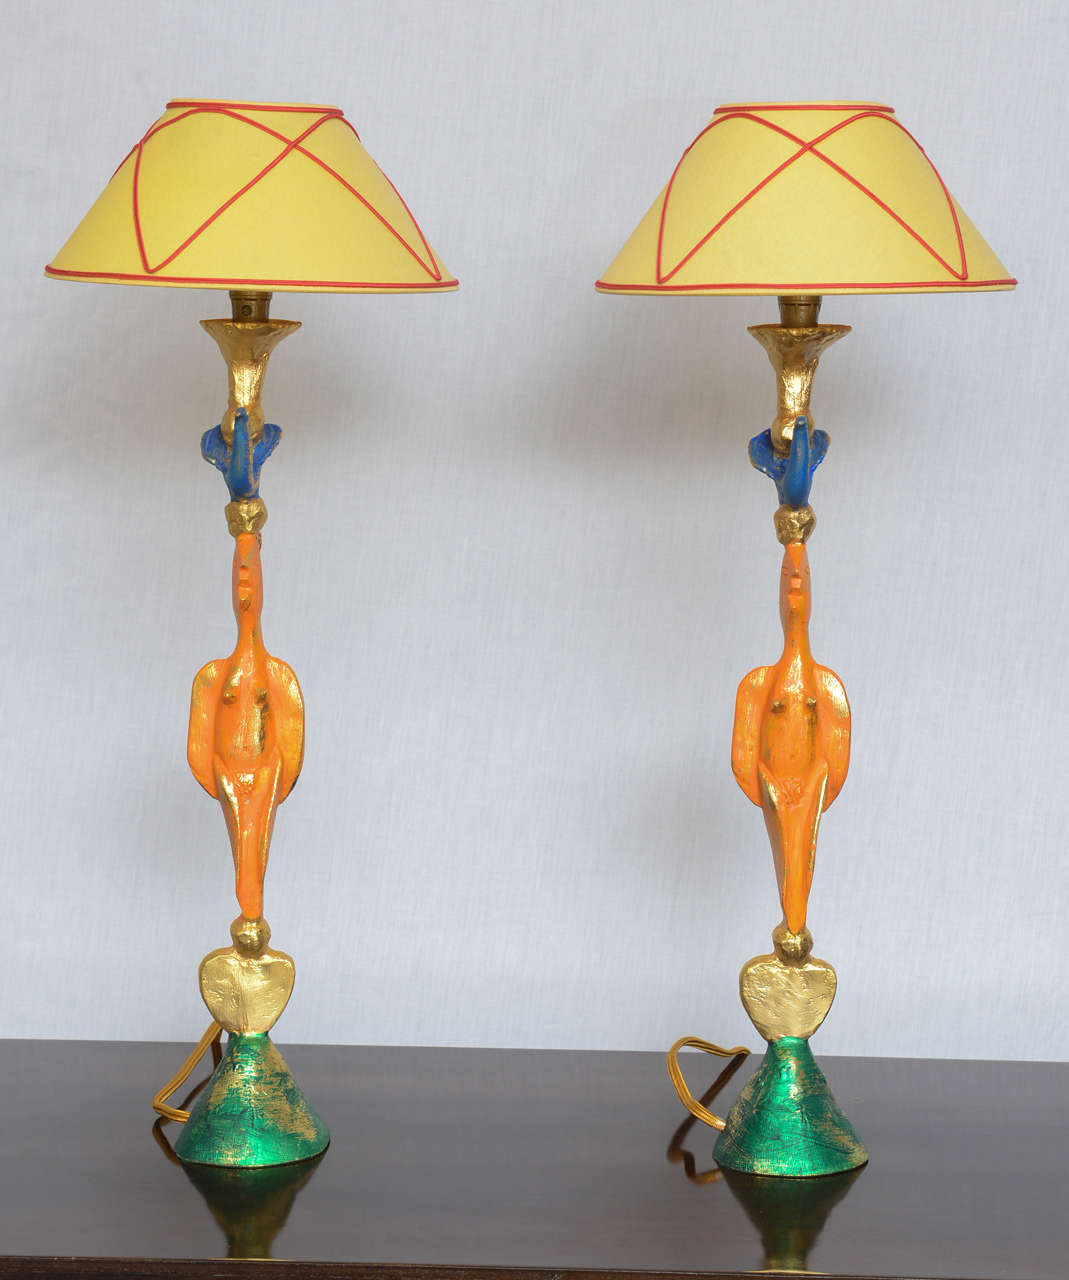 Original paint over gilded bronze bases, these heavy lamps are designed by Pierre Casenove for Fondica.  Original shades included.